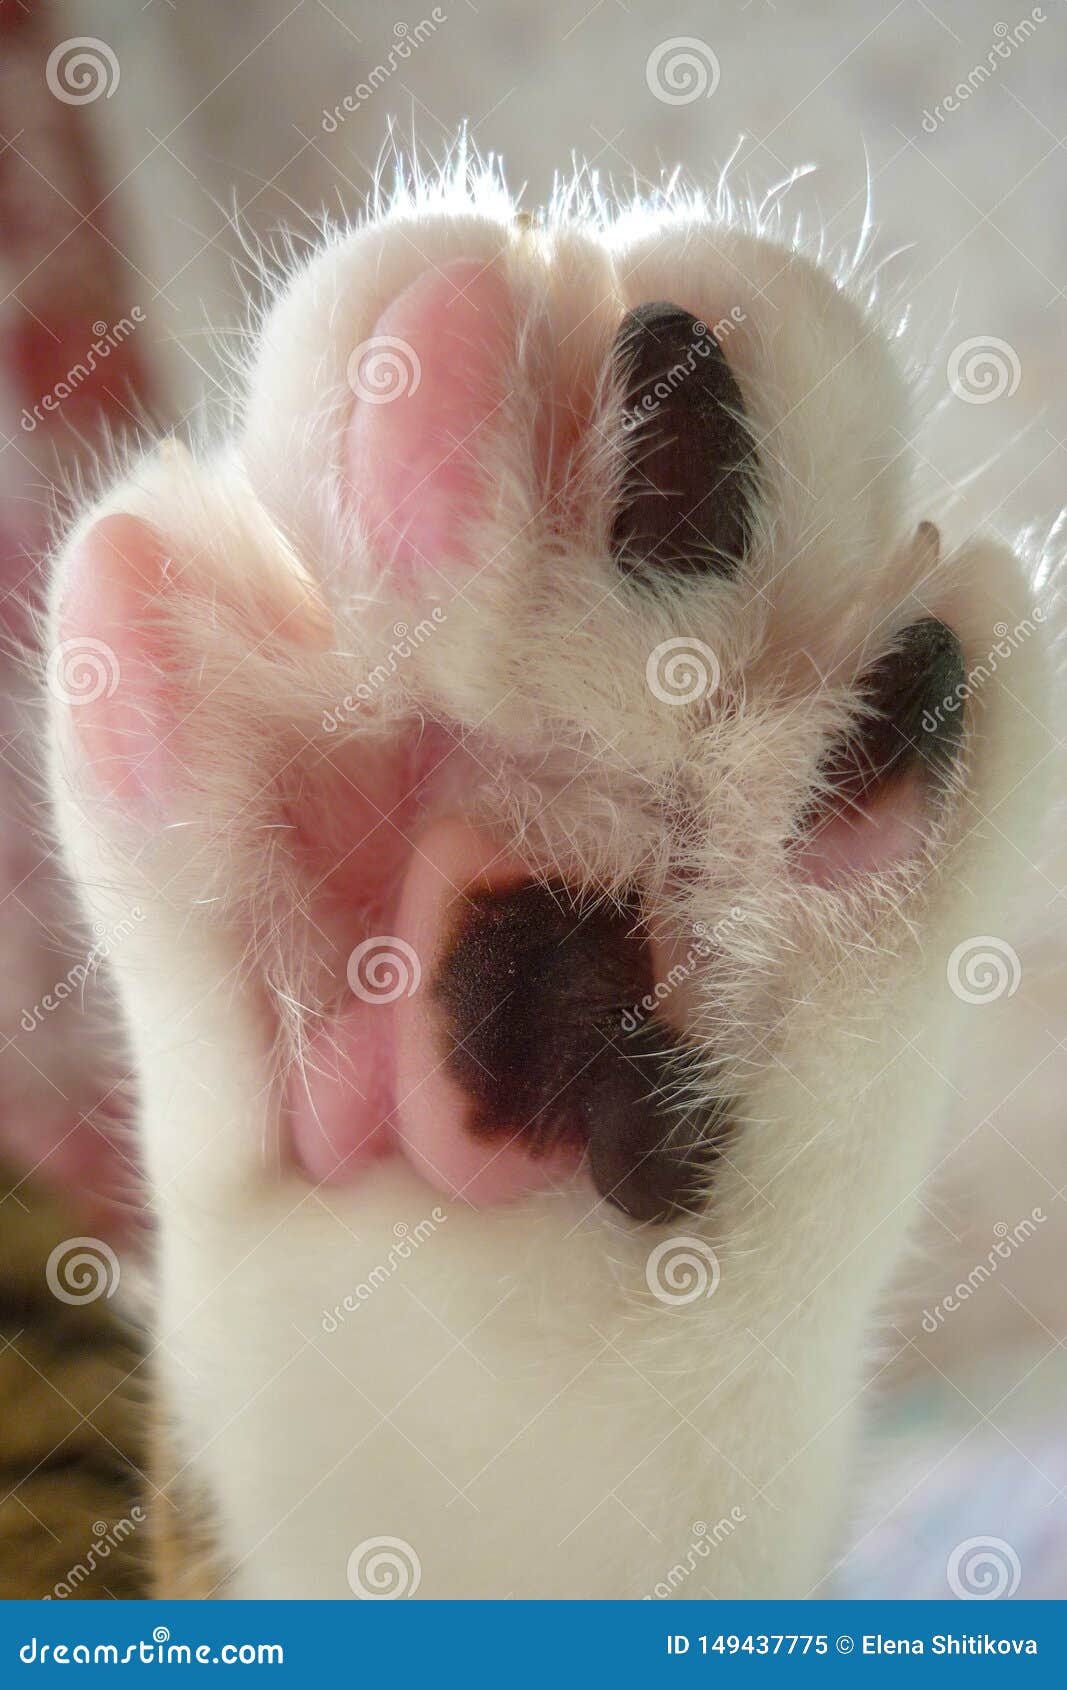 of a Cat Close Up. and Black and White Skin on the Cat`s Foot. Stock Image - Image of kitty, animals: